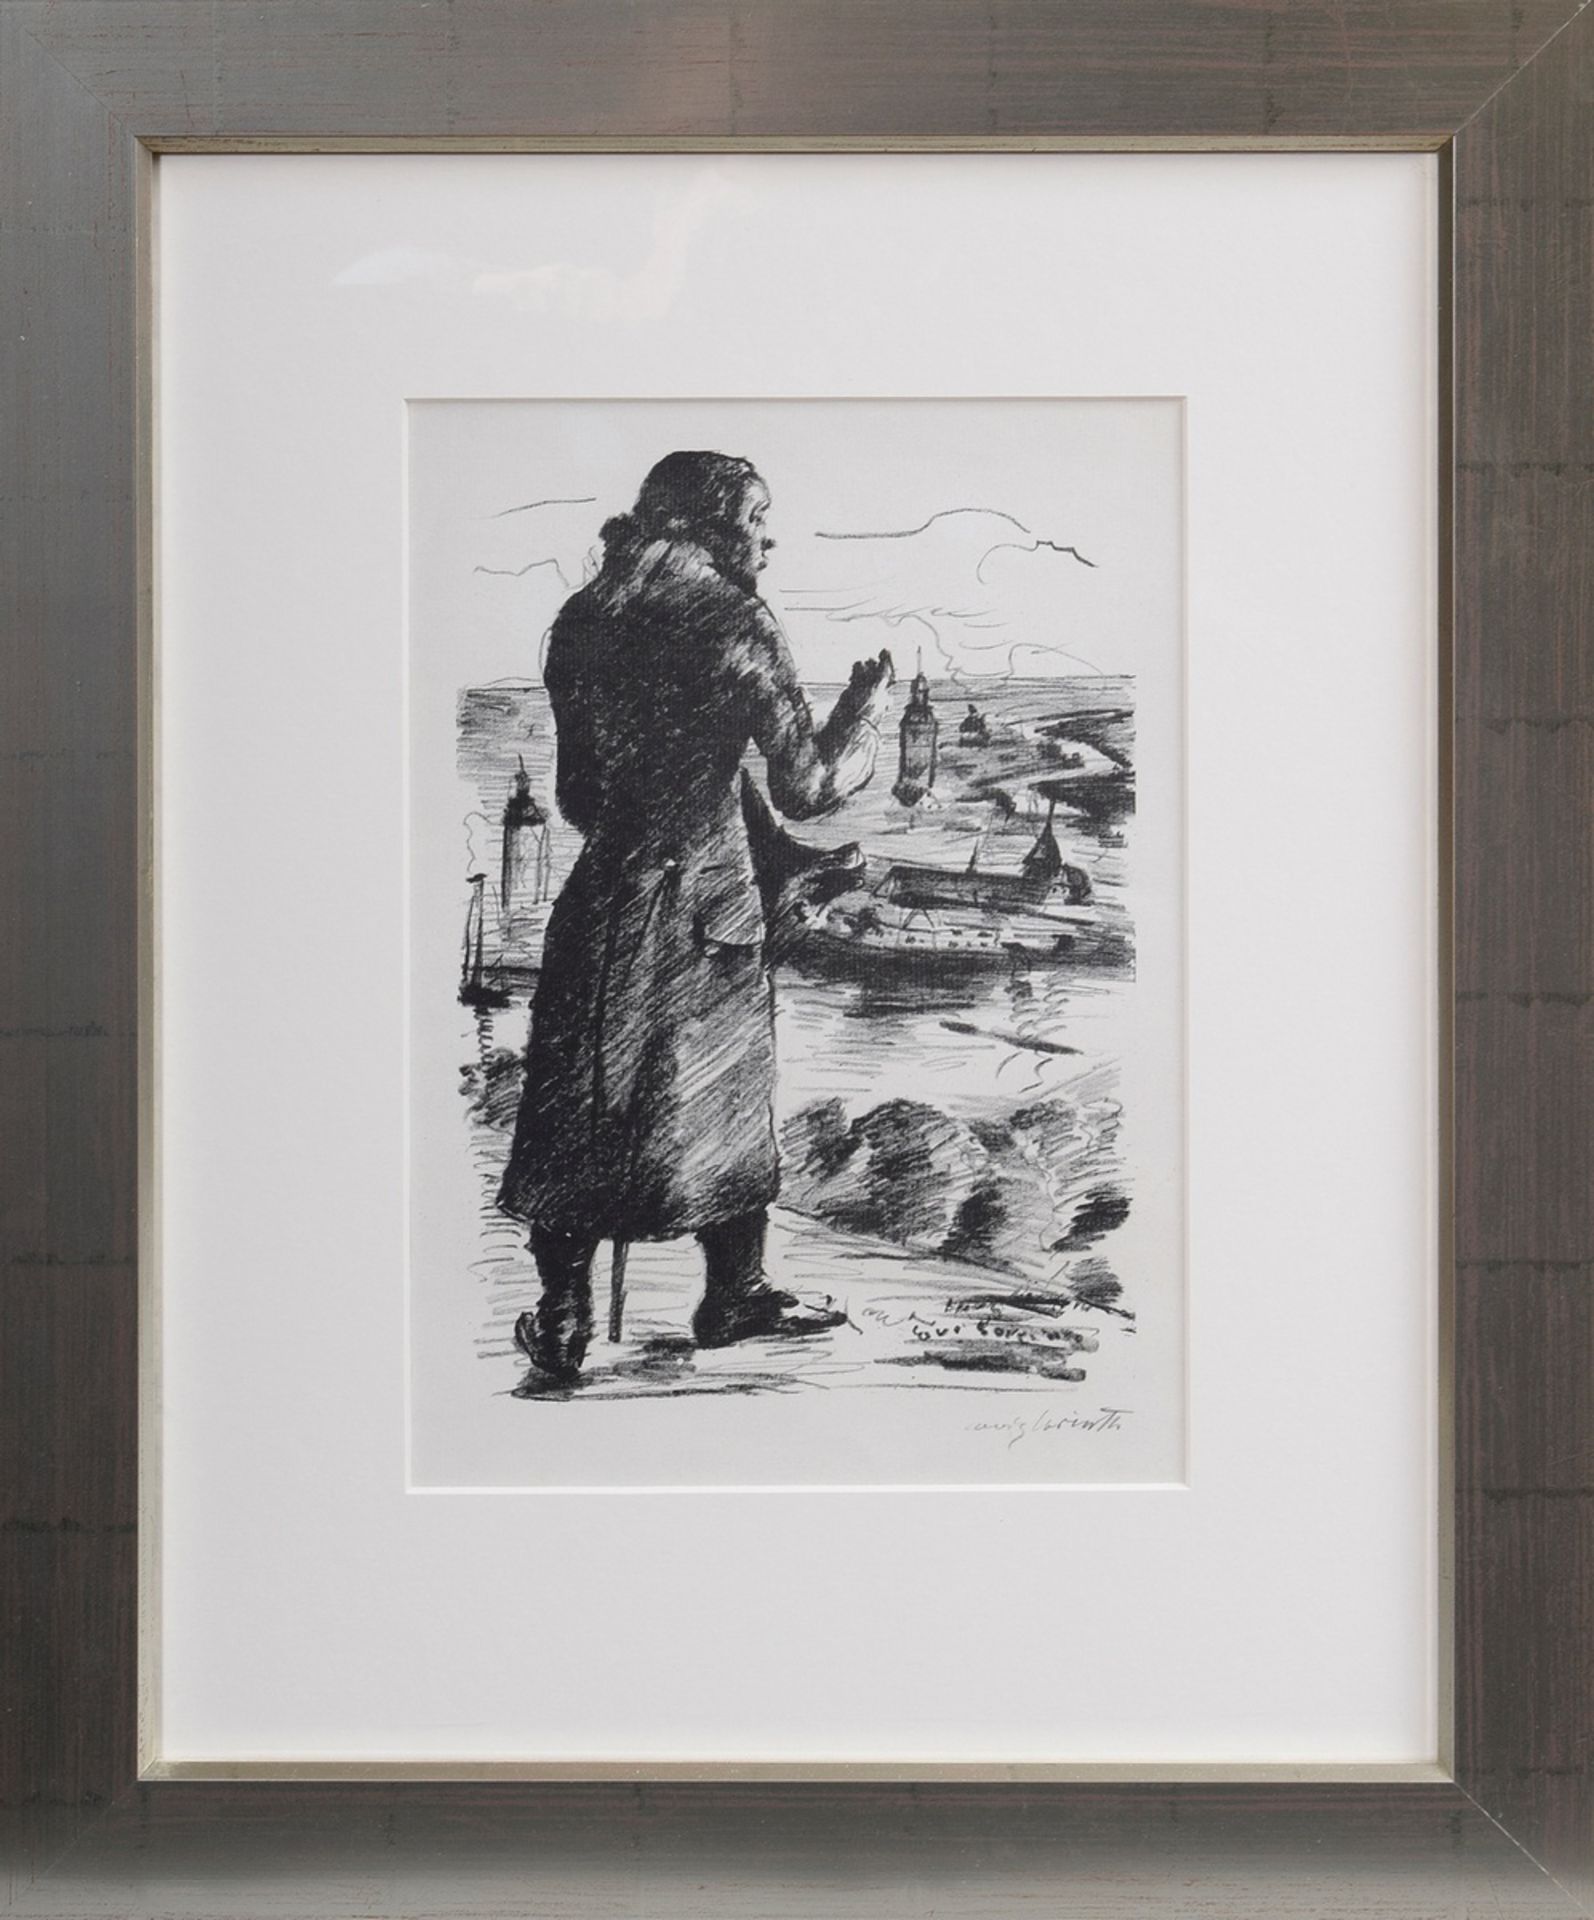 Corinth, Lovis (1858-1925) "Walker in front of a landscape submerged in floods", offset lithograph, - Image 2 of 3